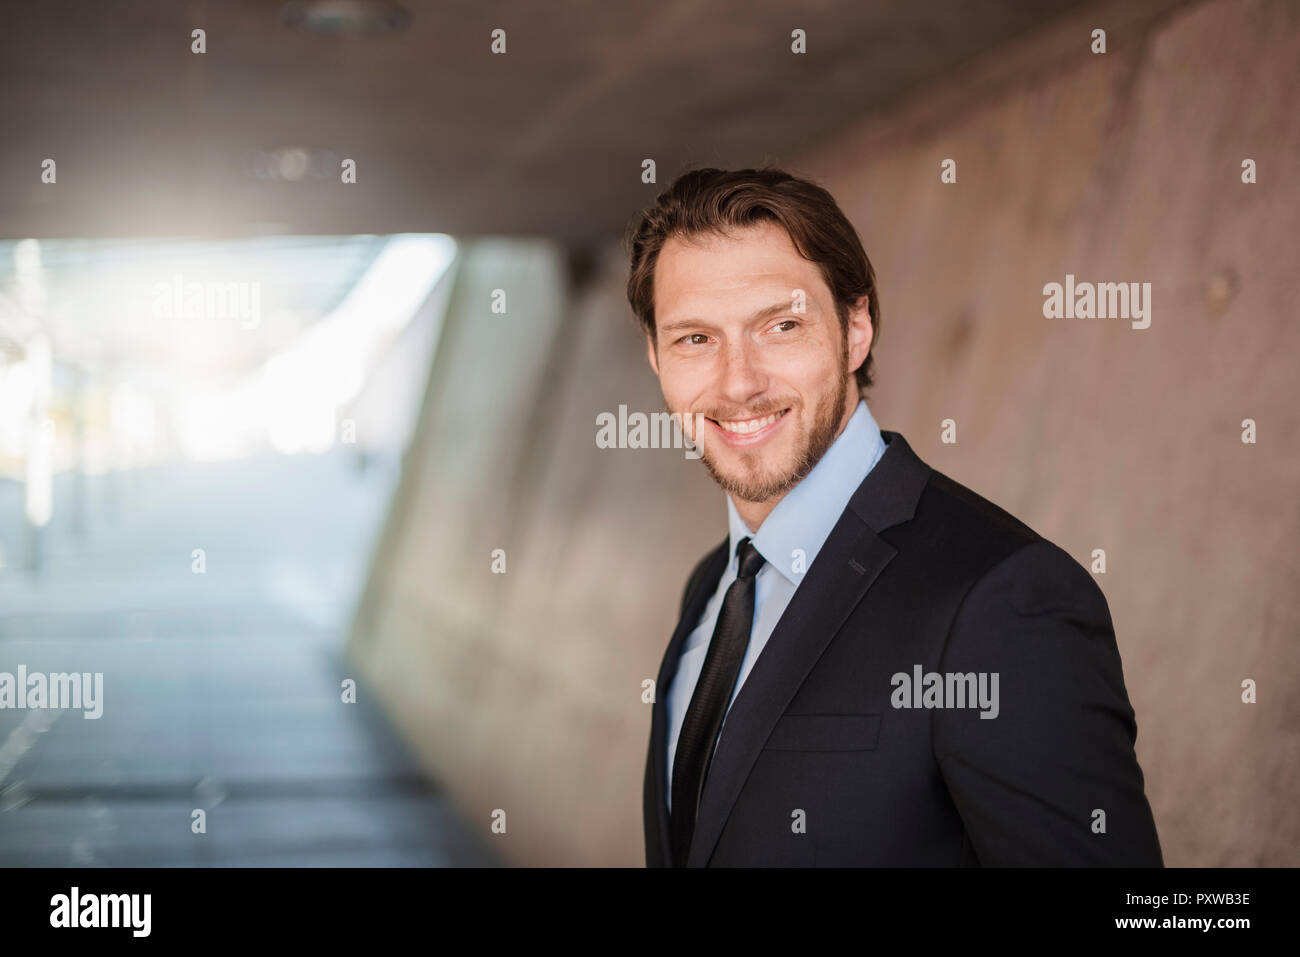 Portrait of smiling businessman in tunnel Banque D'Images